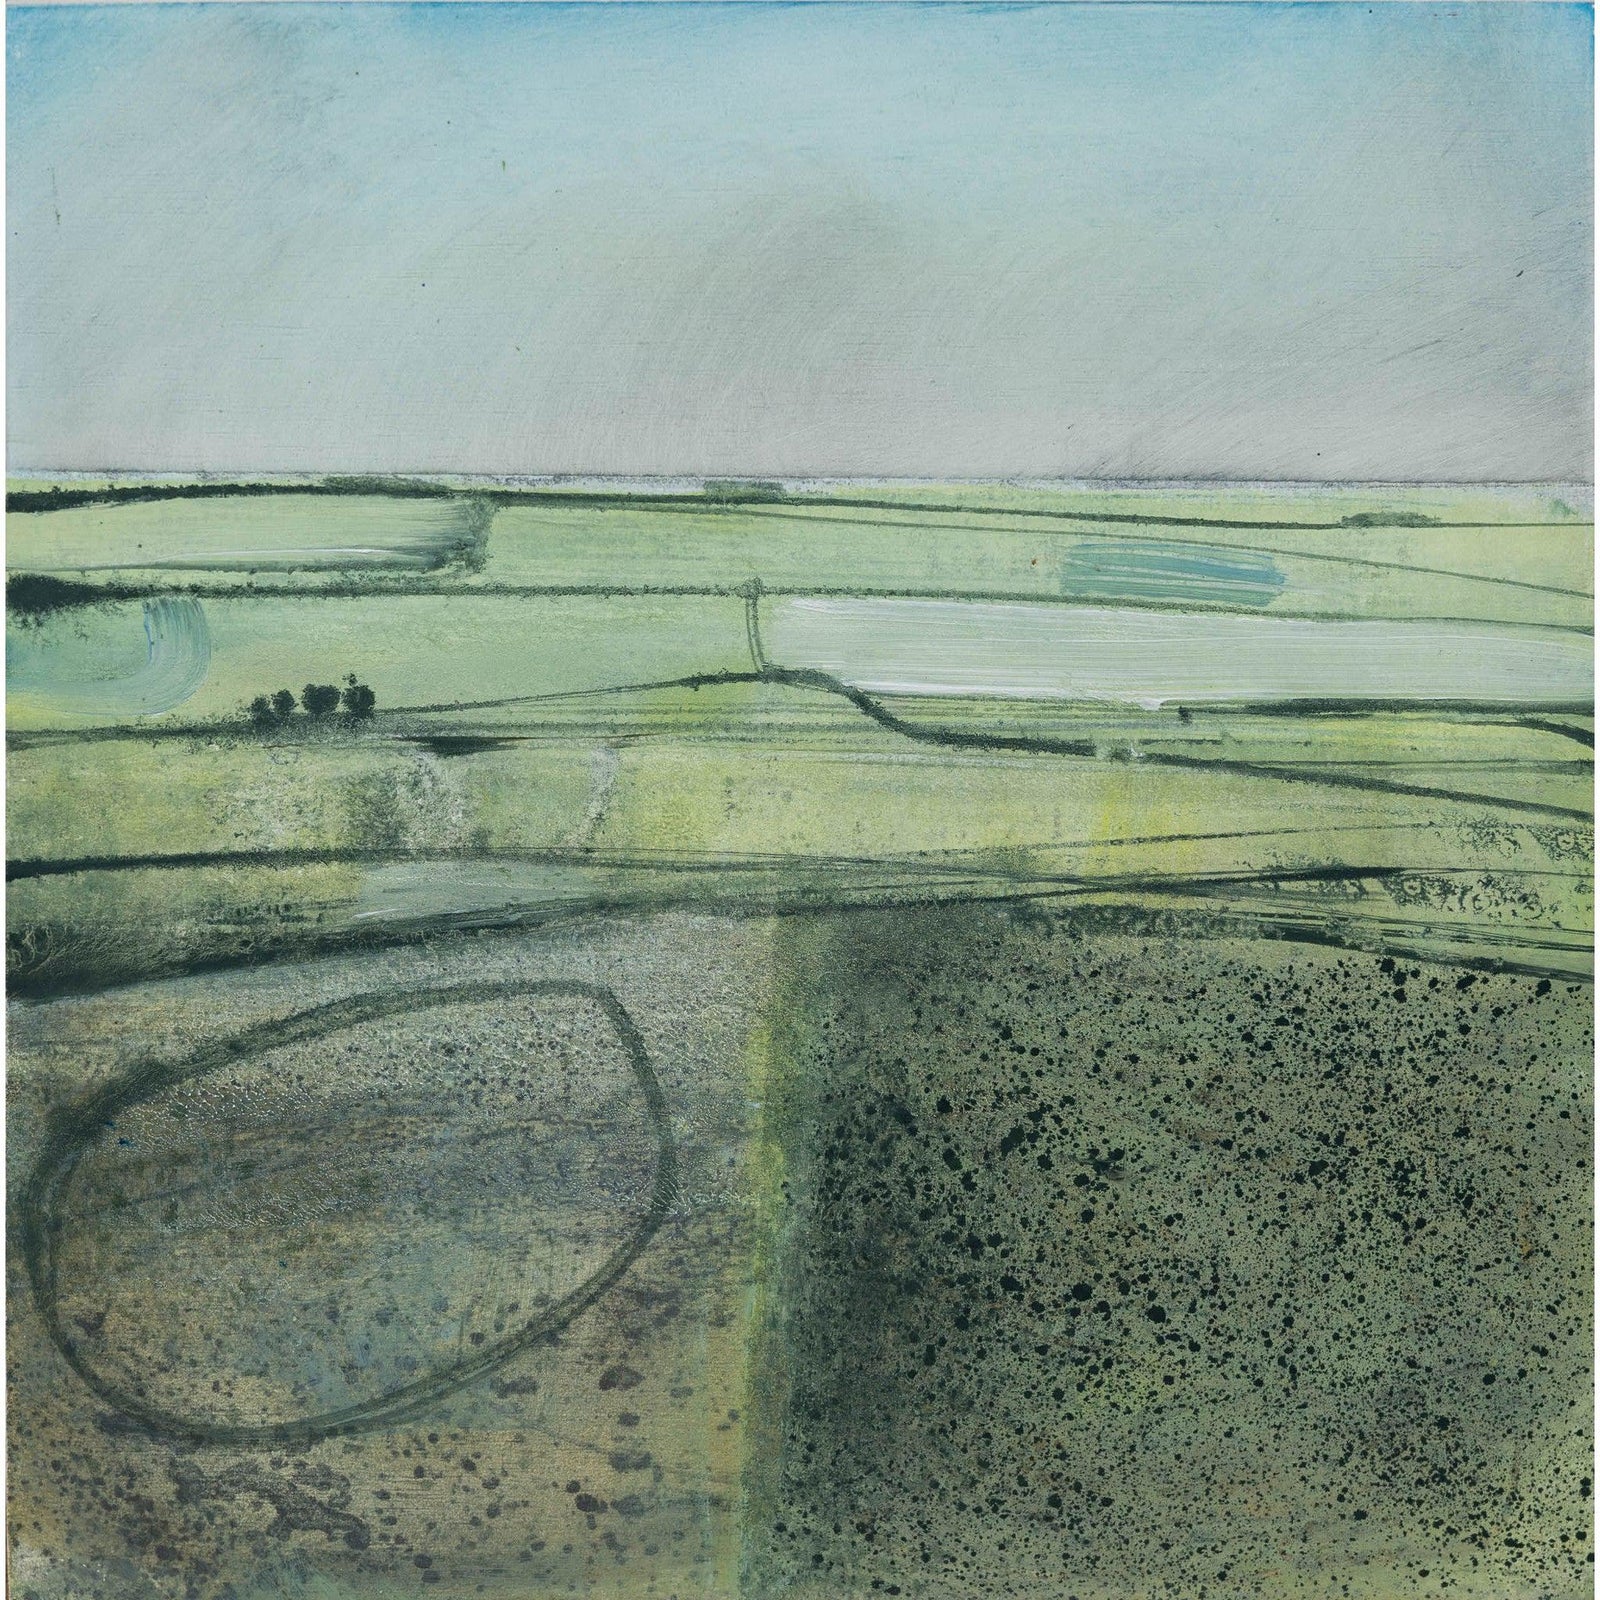 ‘As seen through a haze’ oil on wood block by Ruth Taylor, available at Padstow Gallery, Cornwall